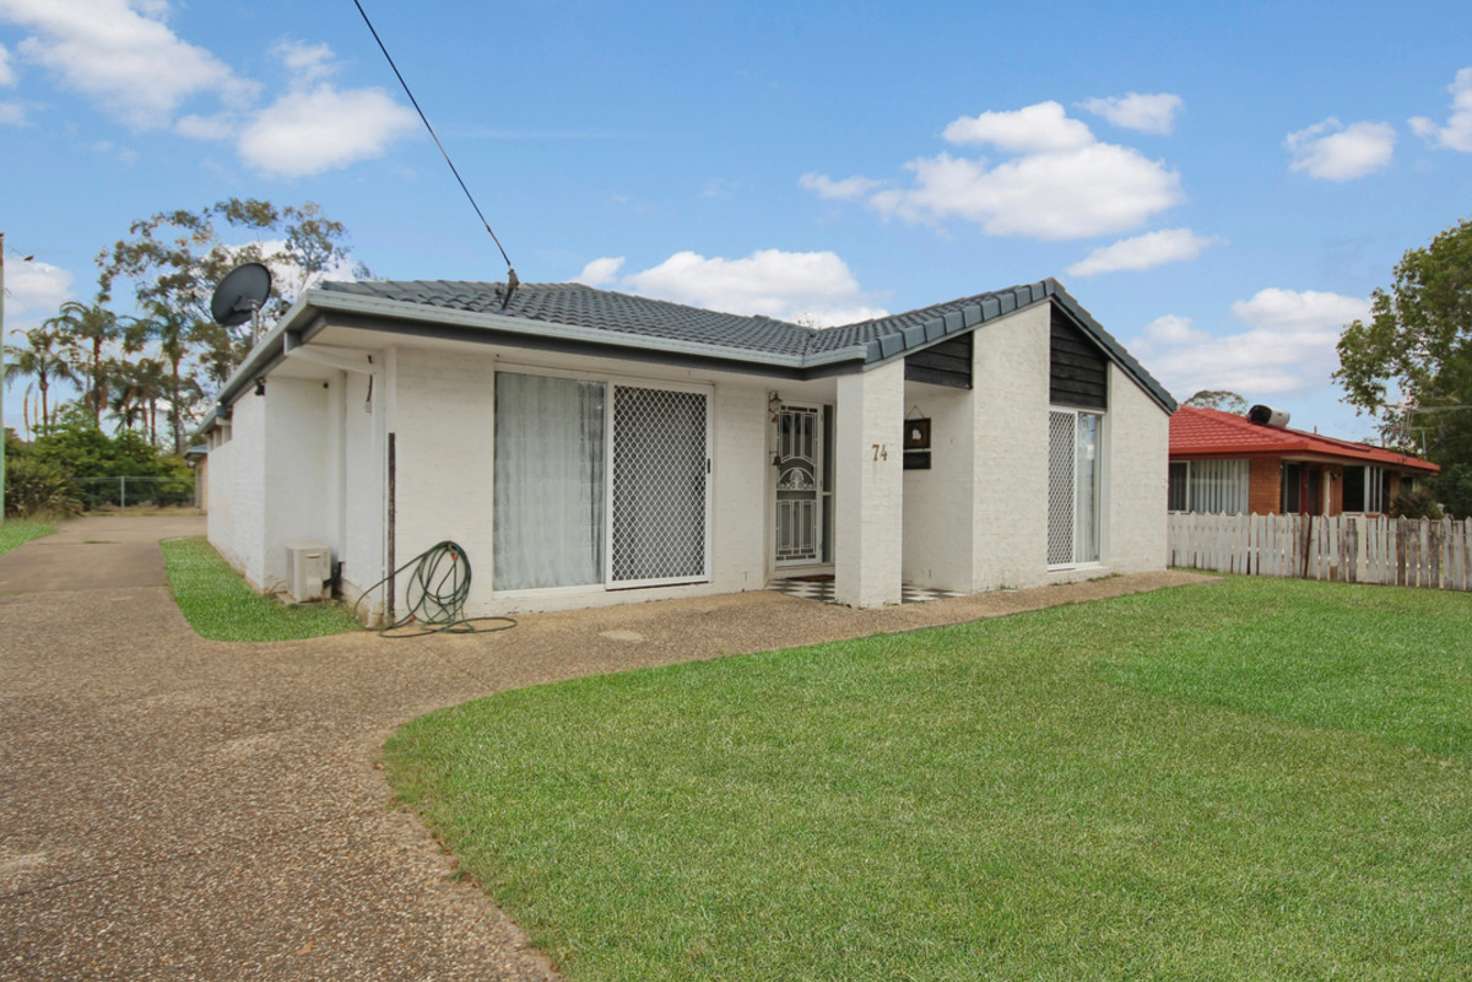 Main view of Homely house listing, 74 Collins Street, Brassall QLD 4305